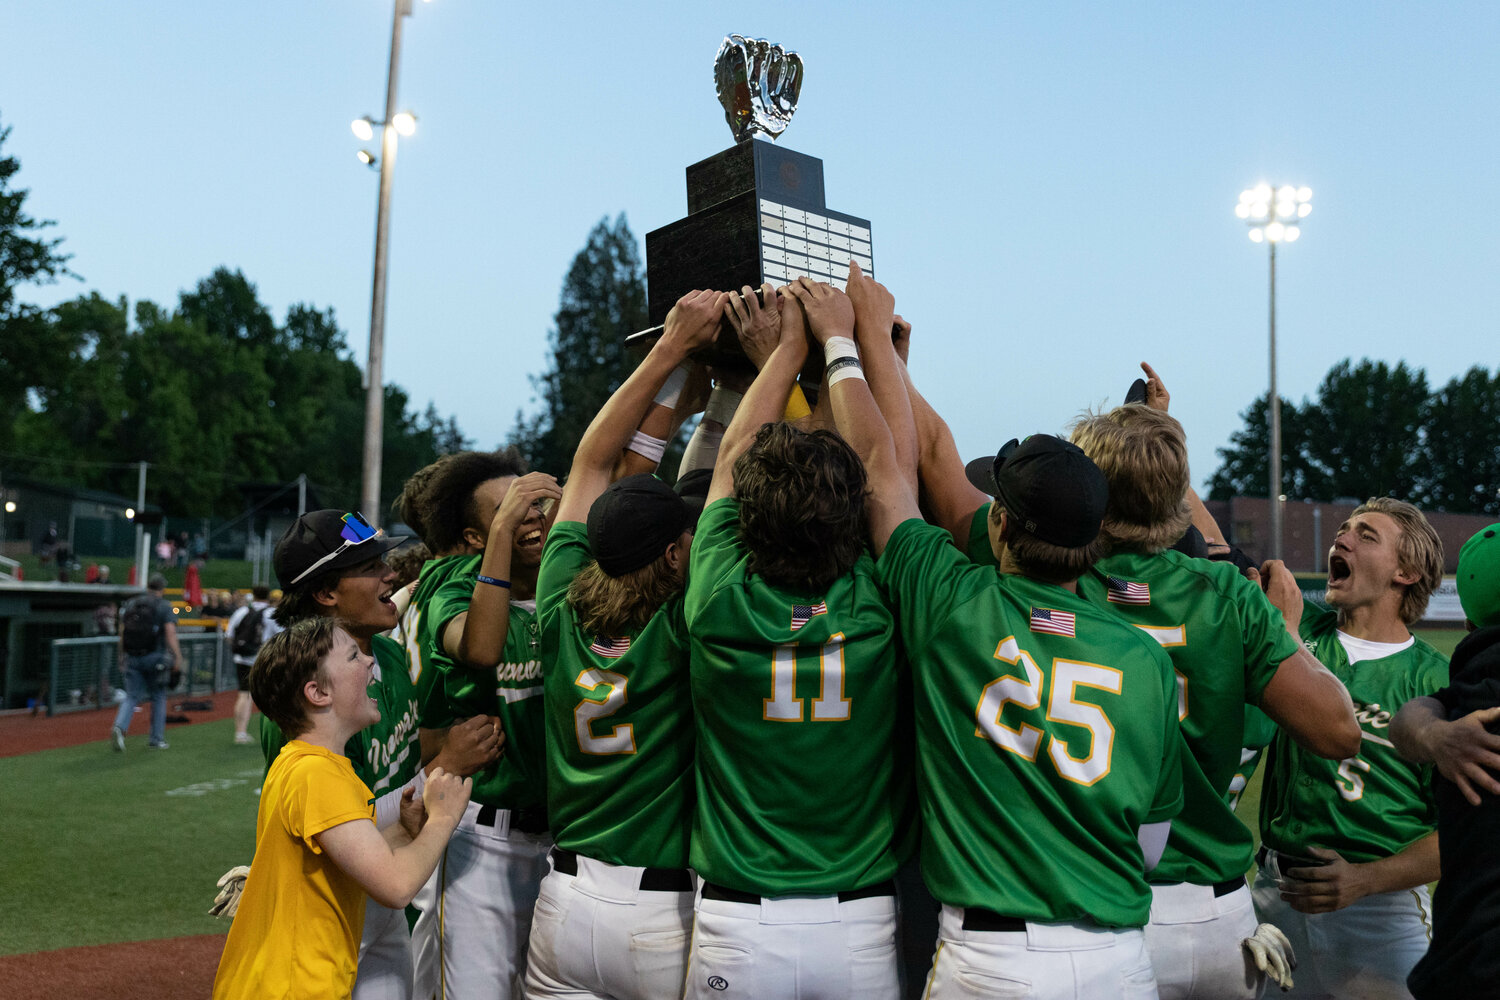 The Tumwater baseball team holds the first-place trophy after a 2-1 win in the 2A state title against Lynden at Joe Martin Stadium in Bellingham May 27.